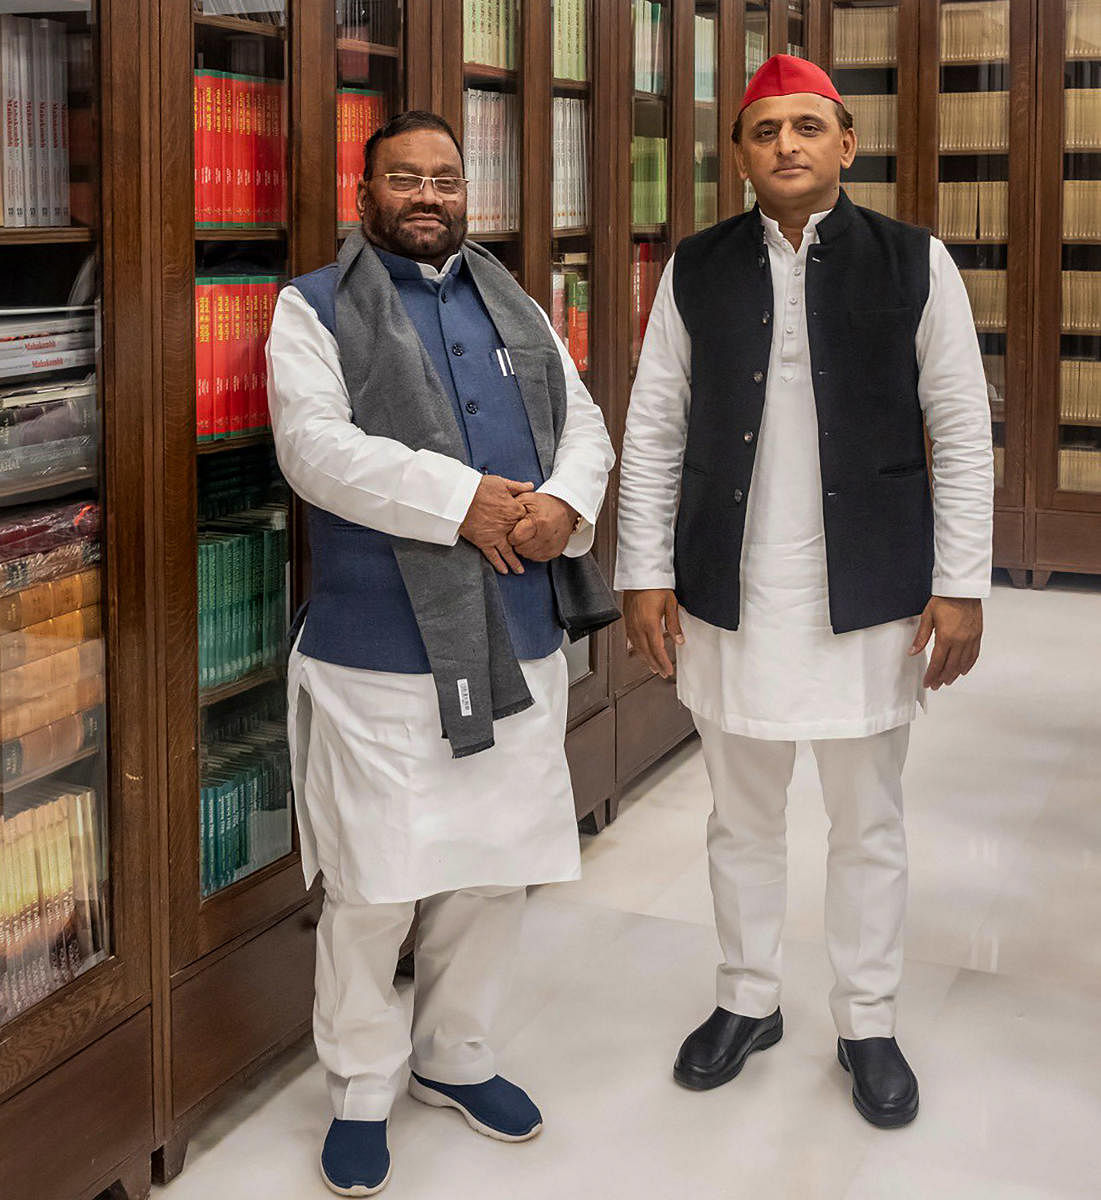 **EDS: IMAGE POSTED @yadavakhilesh** Lucknow: Former UP minister Swami Prasad Maurya (L) joins Samajwadi Party in the presence of the party chief Akhilesh Yadav, in Lucknow, Tuesday, Jan 11, 2022. (PTI Photo) (PTI01_11_2022_000058B)